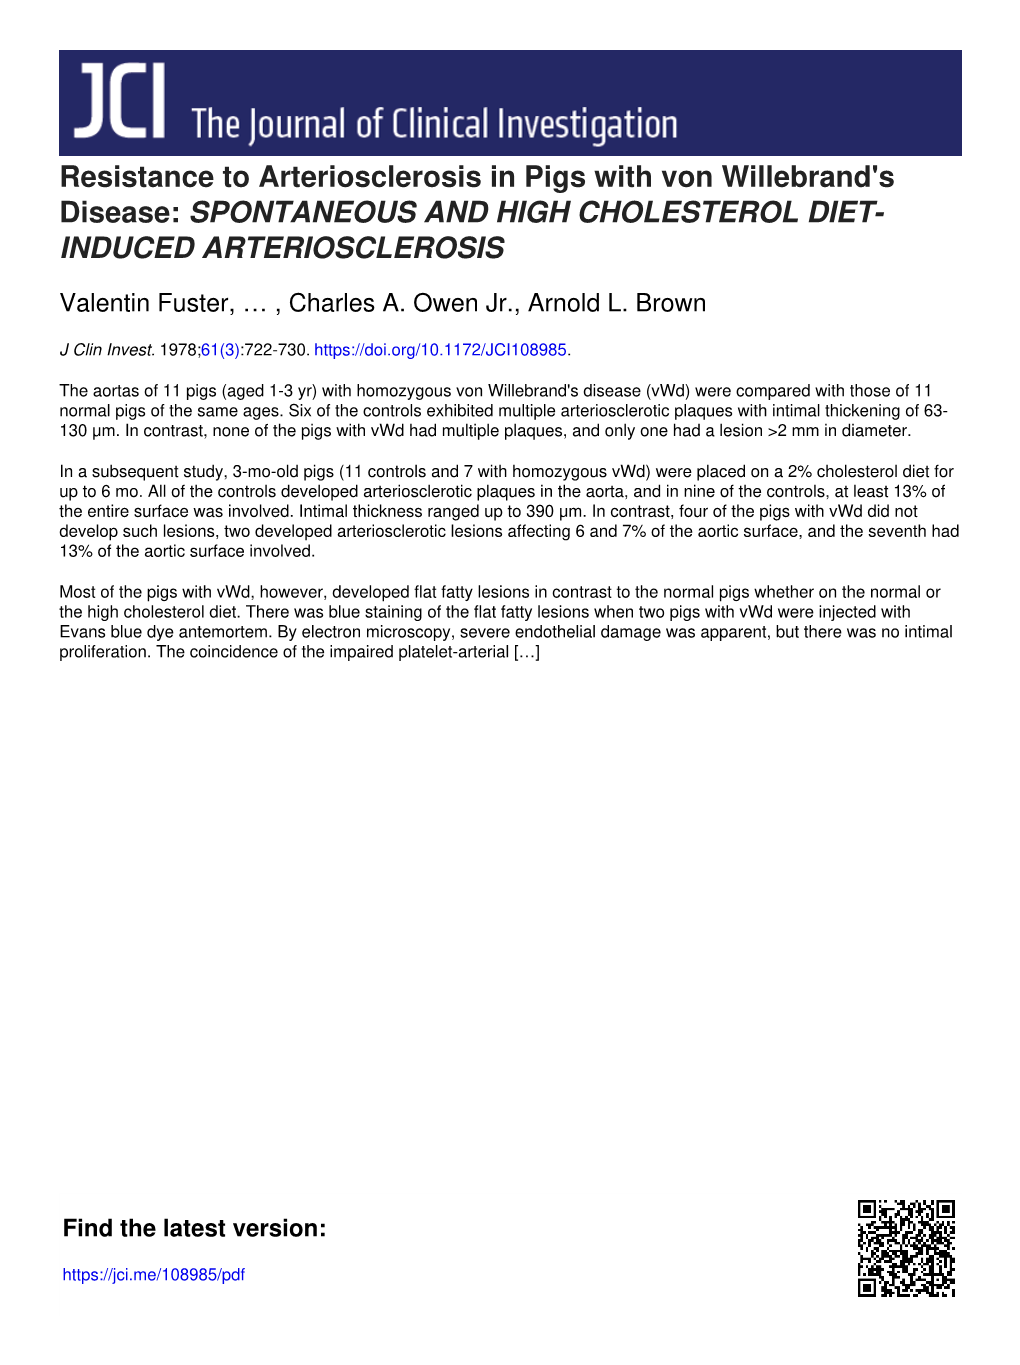 Resistance to Arteriosclerosis in Pigs with Von Willebrand's Disease: SPONTANEOUS and HIGH CHOLESTEROL DIET- INDUCED ARTERIOSCLEROSIS